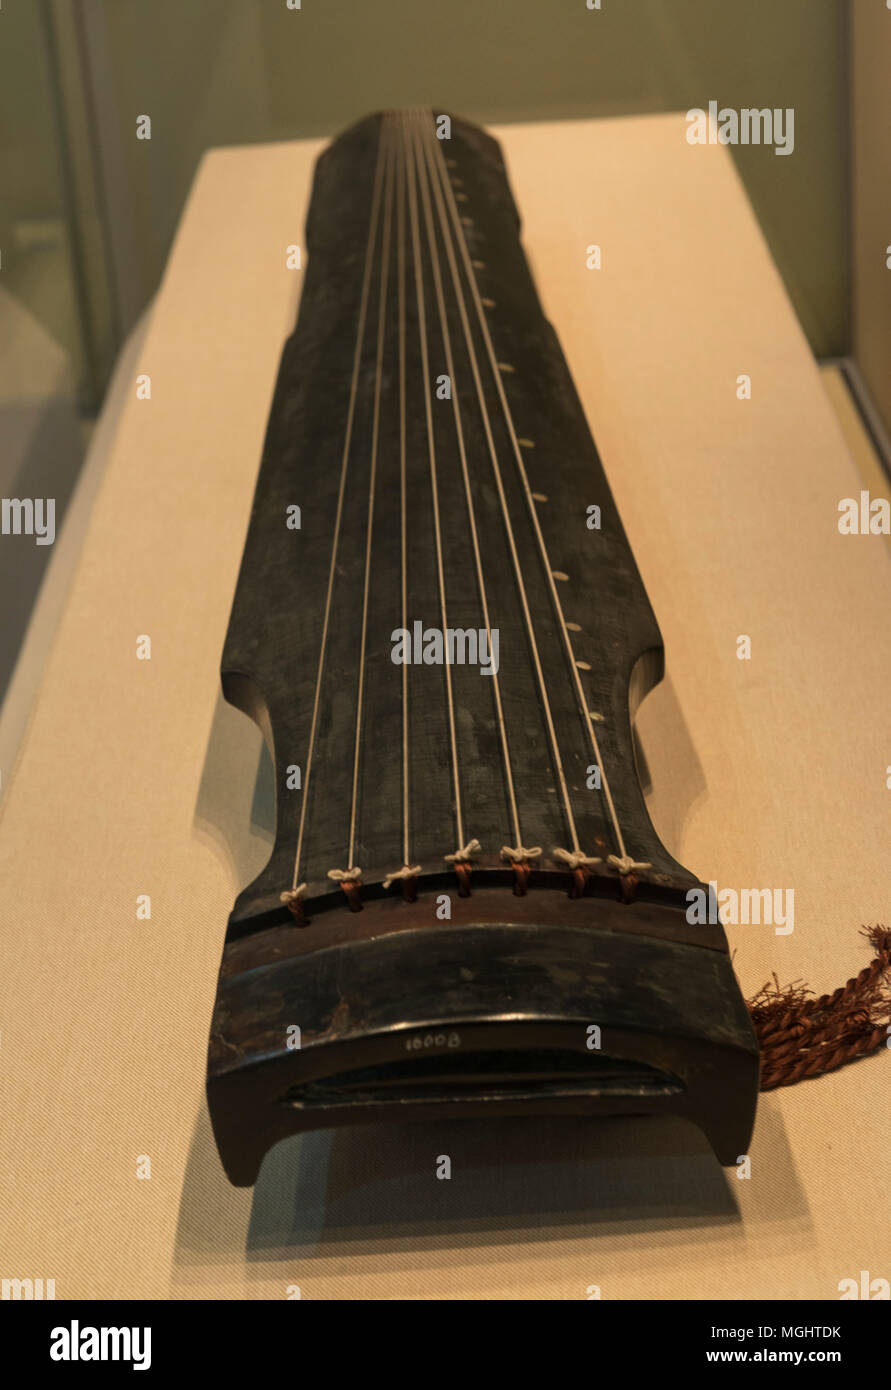 Zhongni form Guqin named Hao Zhong (Horn-bell) from Song Dynasty (960–1279) in Zhejiang Museum, China. Guqin is an ancient seven-stringed plucked instrument. Stock Photo